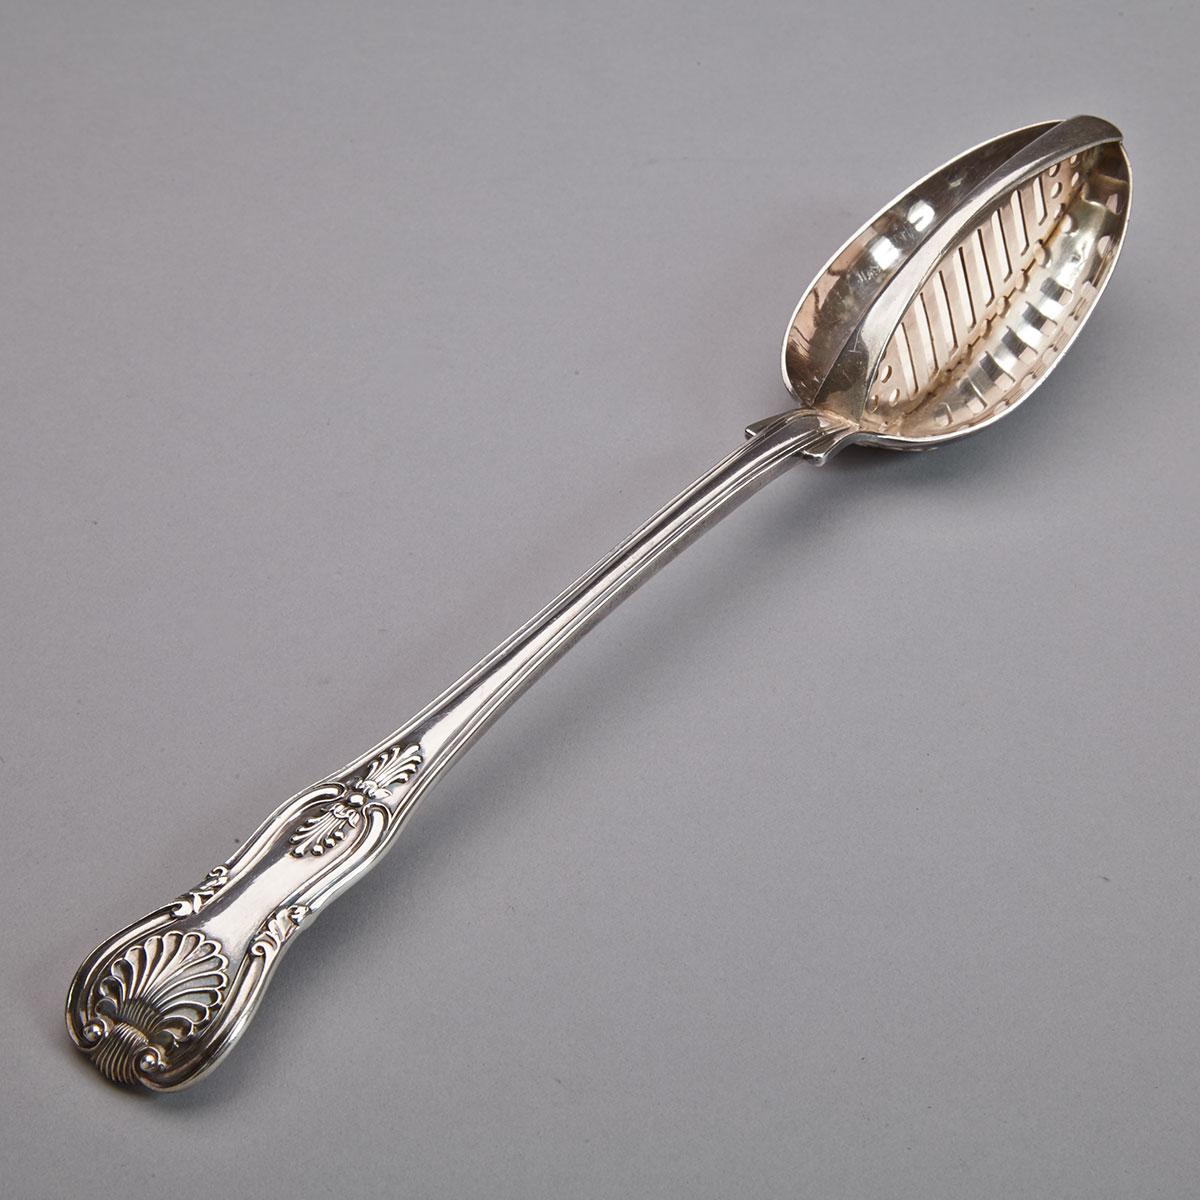 William IV Silver Kings Pattern Serving Spoon, William Eaton, London, 1832